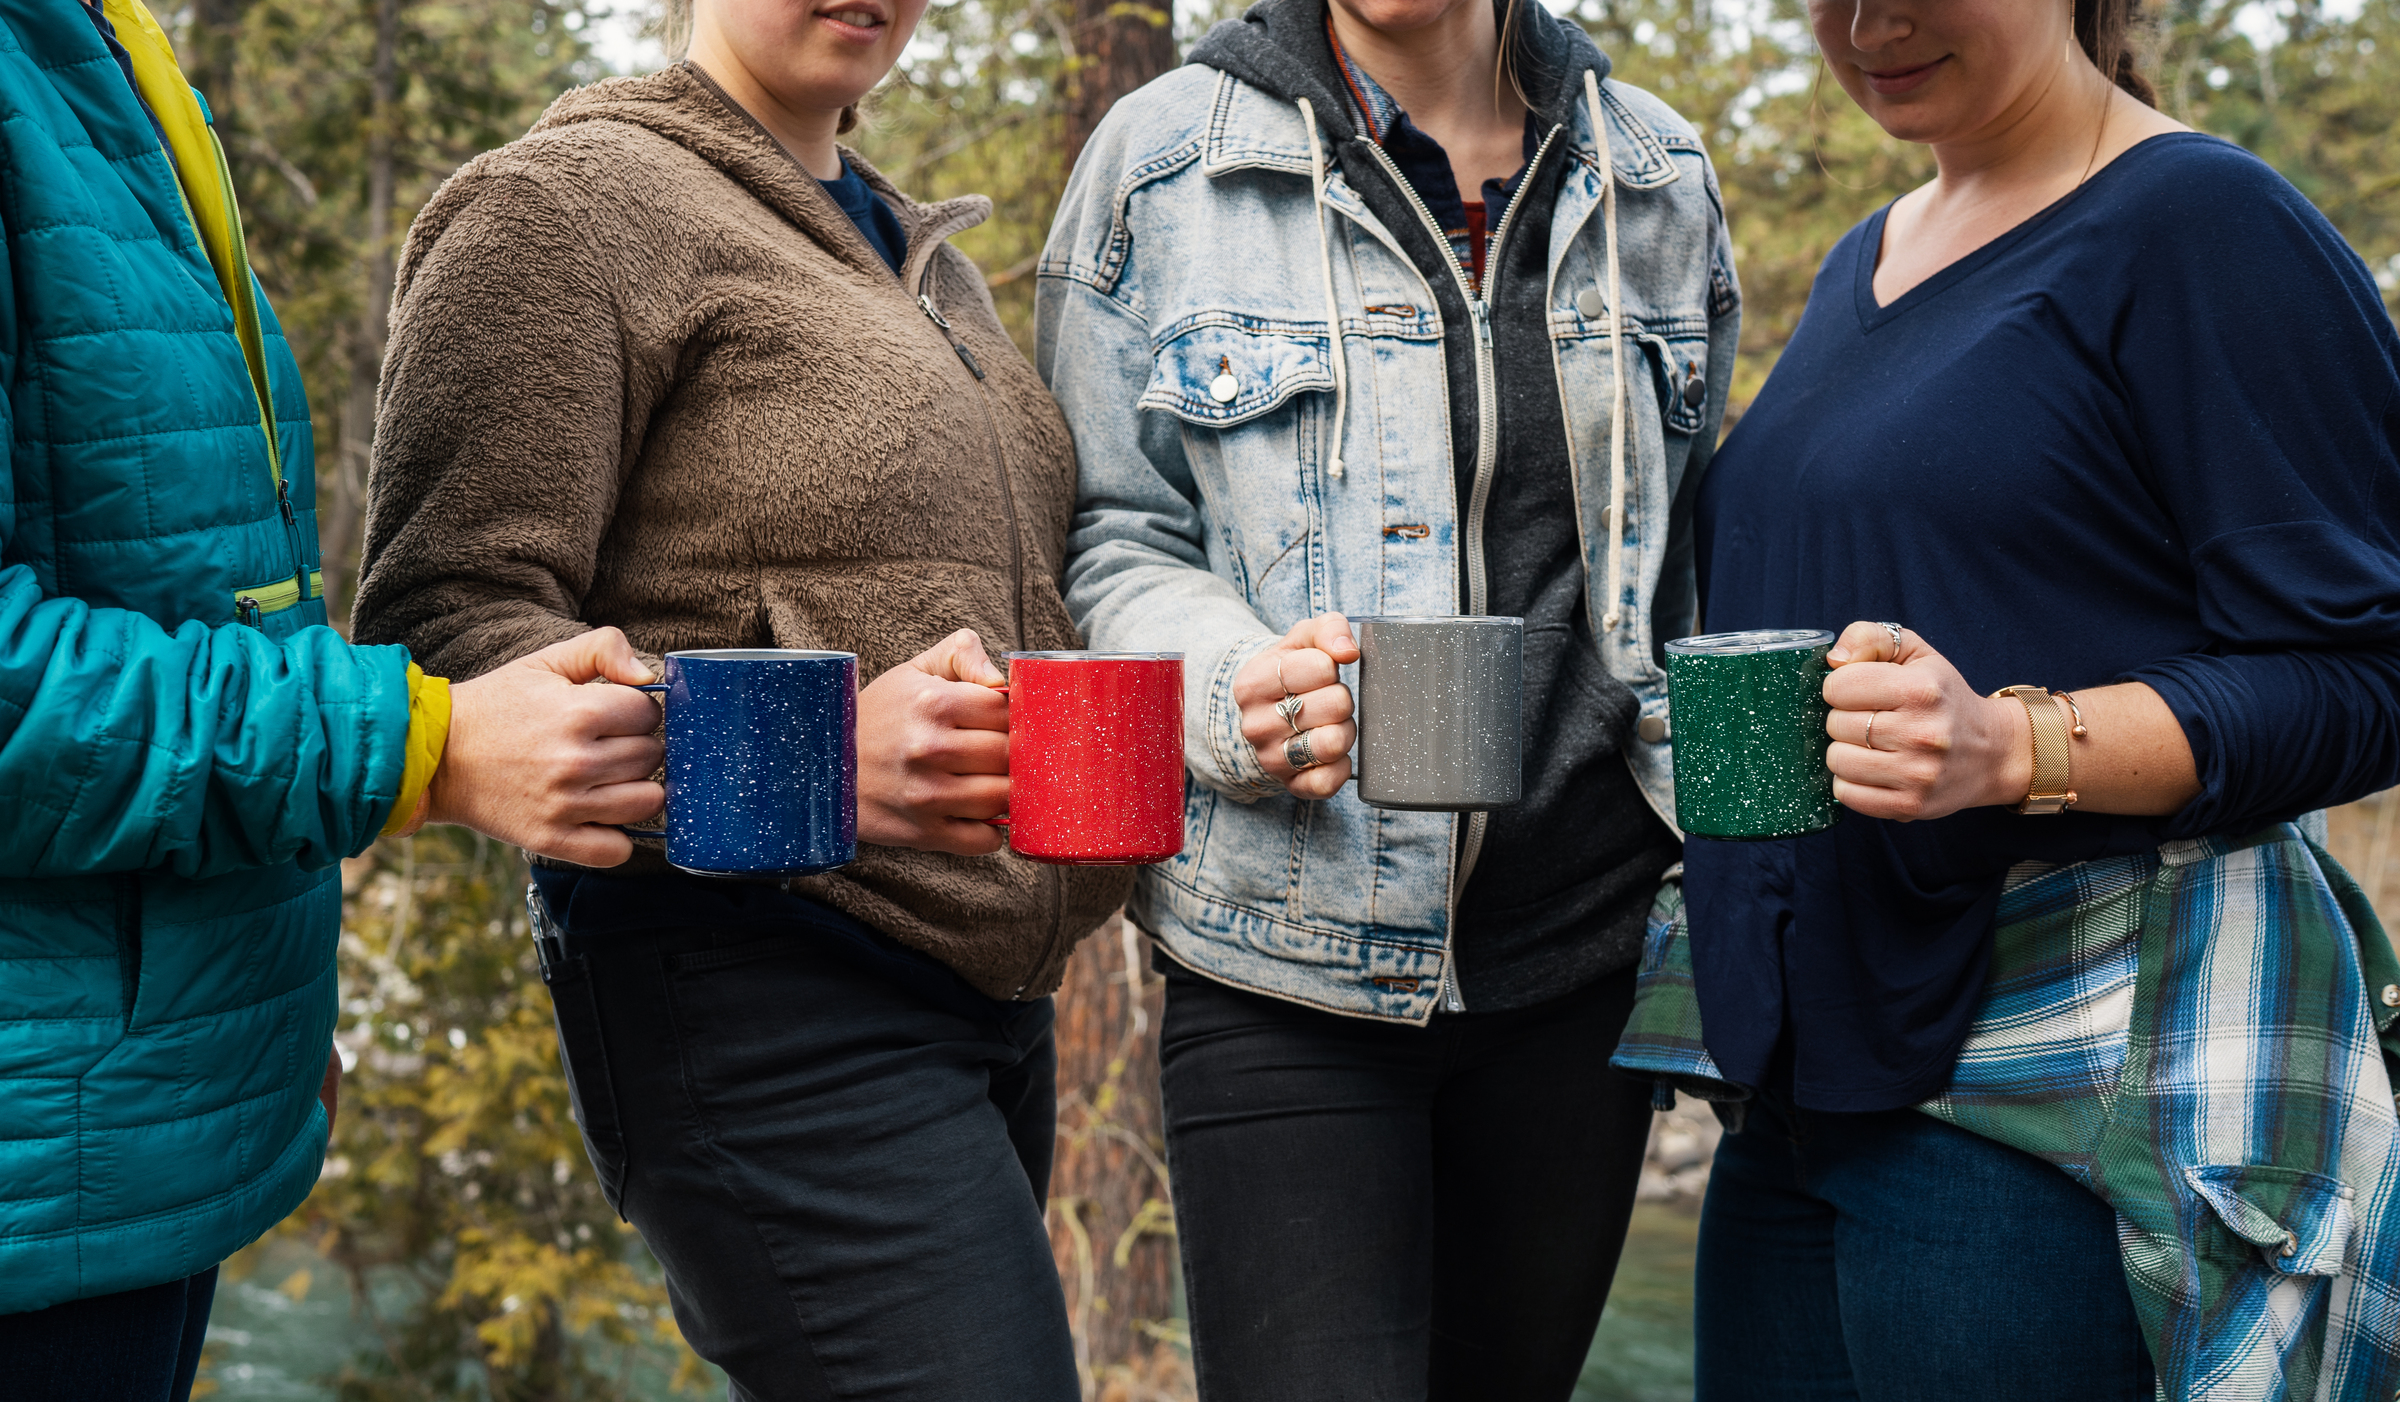 12oz_green-blue-gray-red_speckled_camp cup.jpg